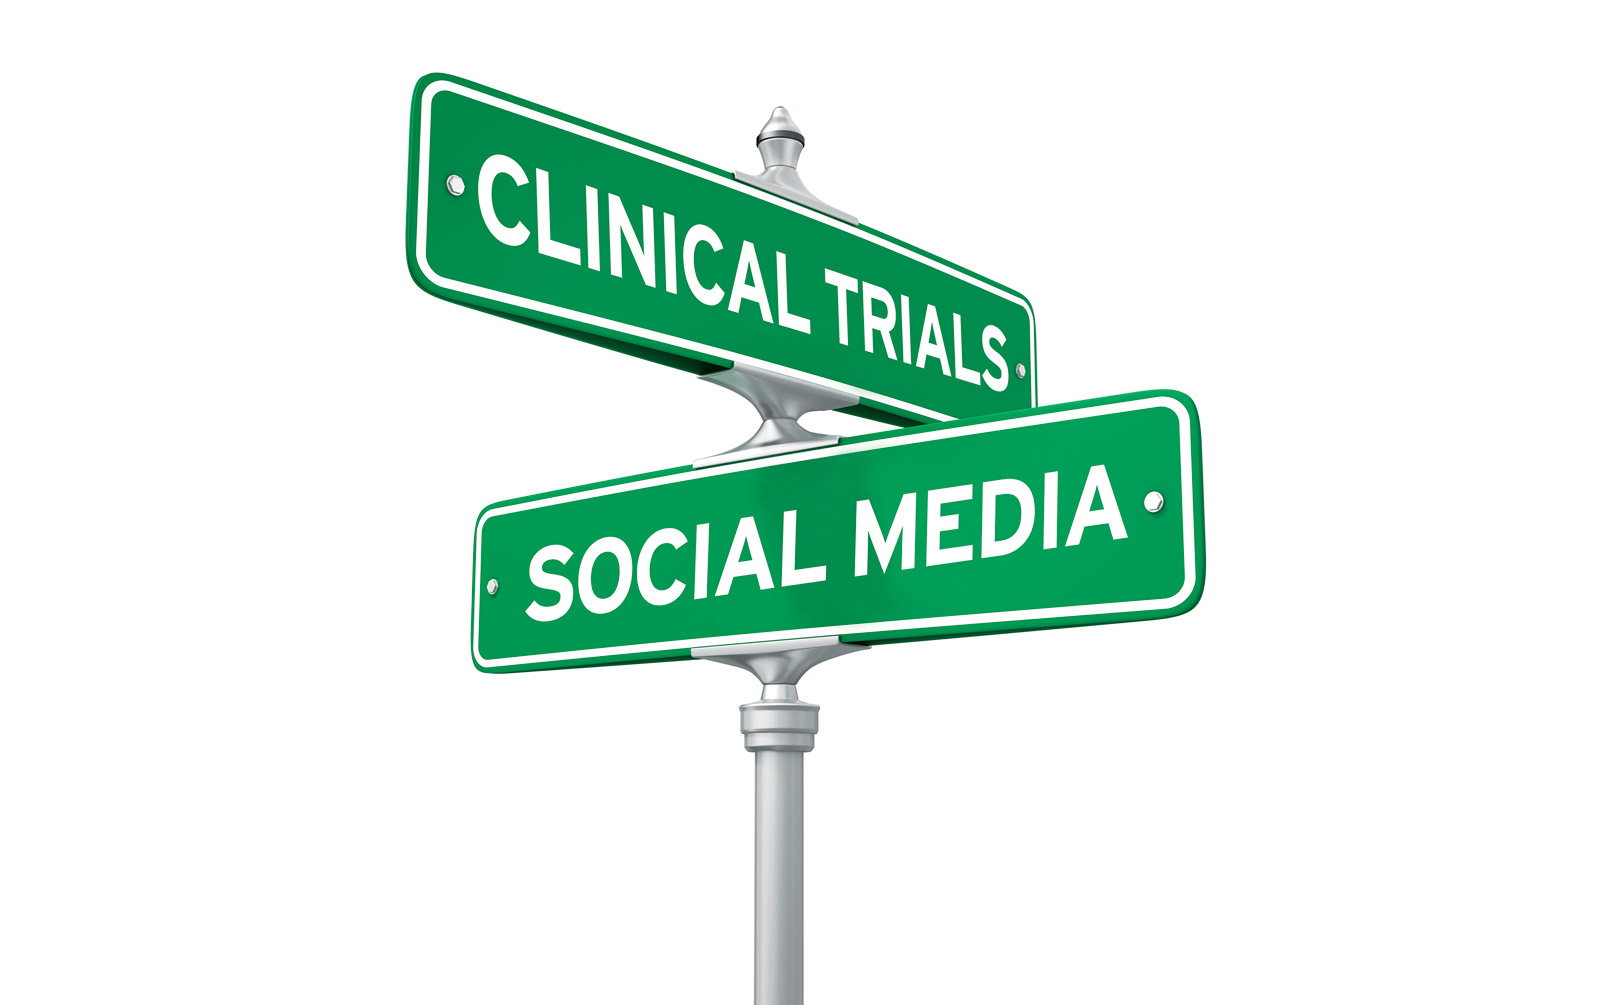 Improving Clinical Trials Through Clinician, Patient Use of Social Media